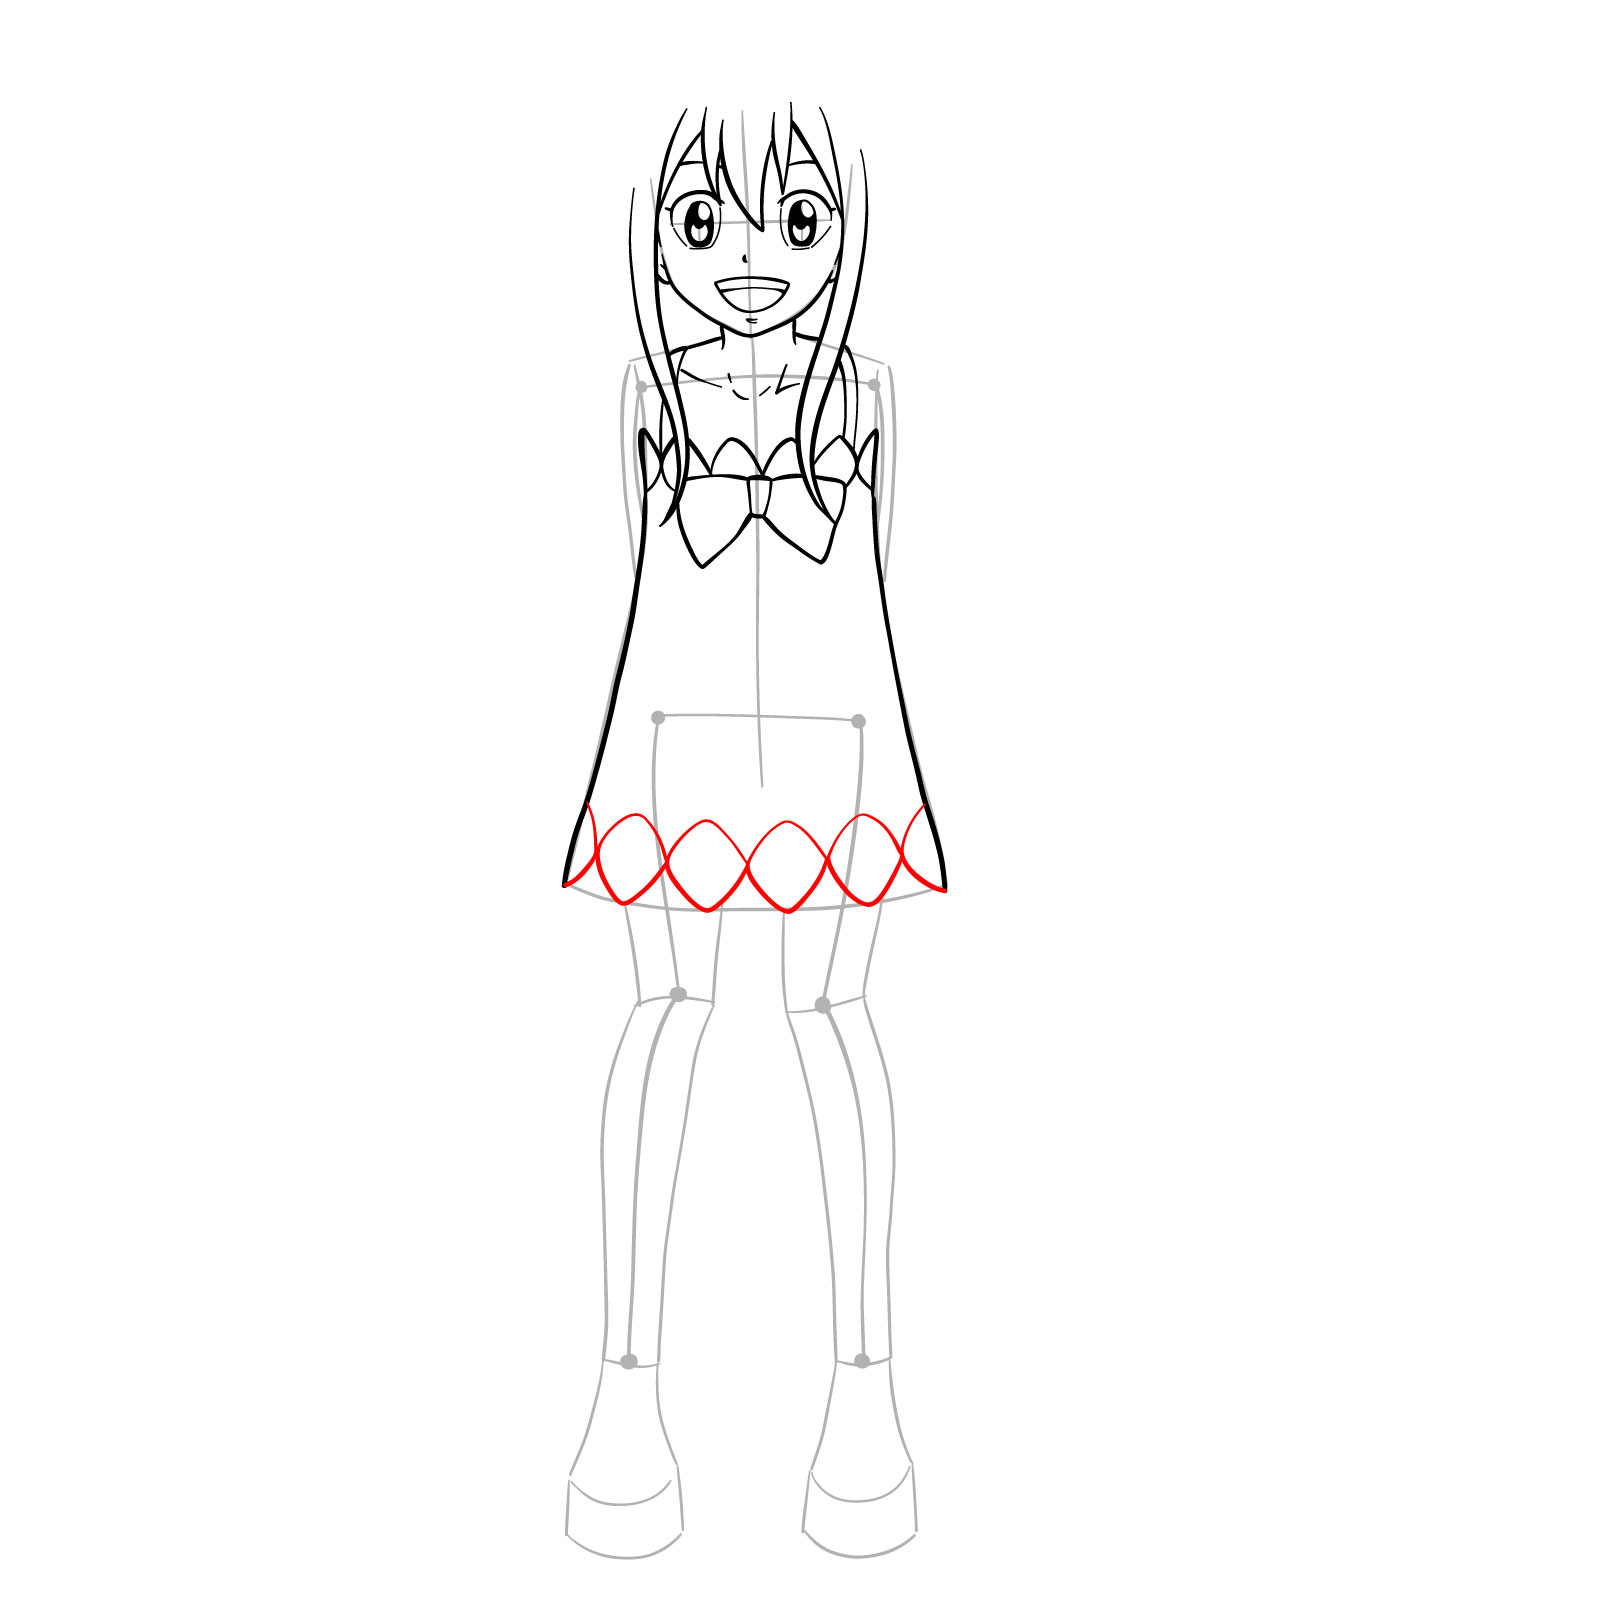 How to draw Wendy Marvell from Fairy Tail - step 13